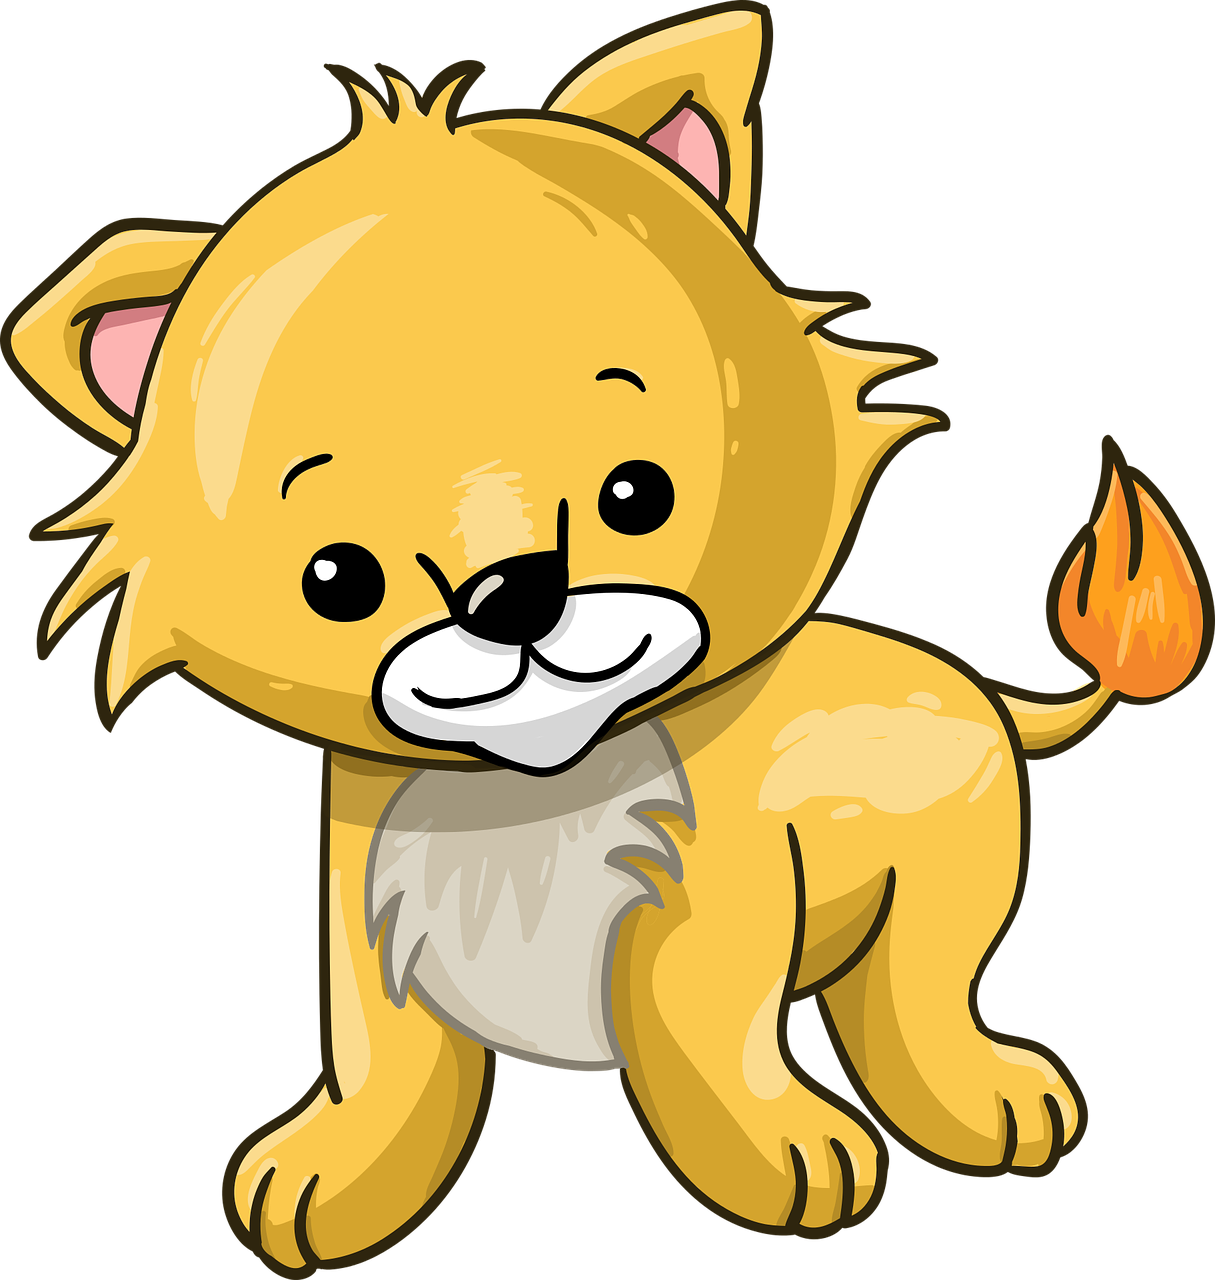 a close up of a cartoon cat on a black background, a digital rendering, fire lion, very cute and childlike, a dingo mascot, clipart